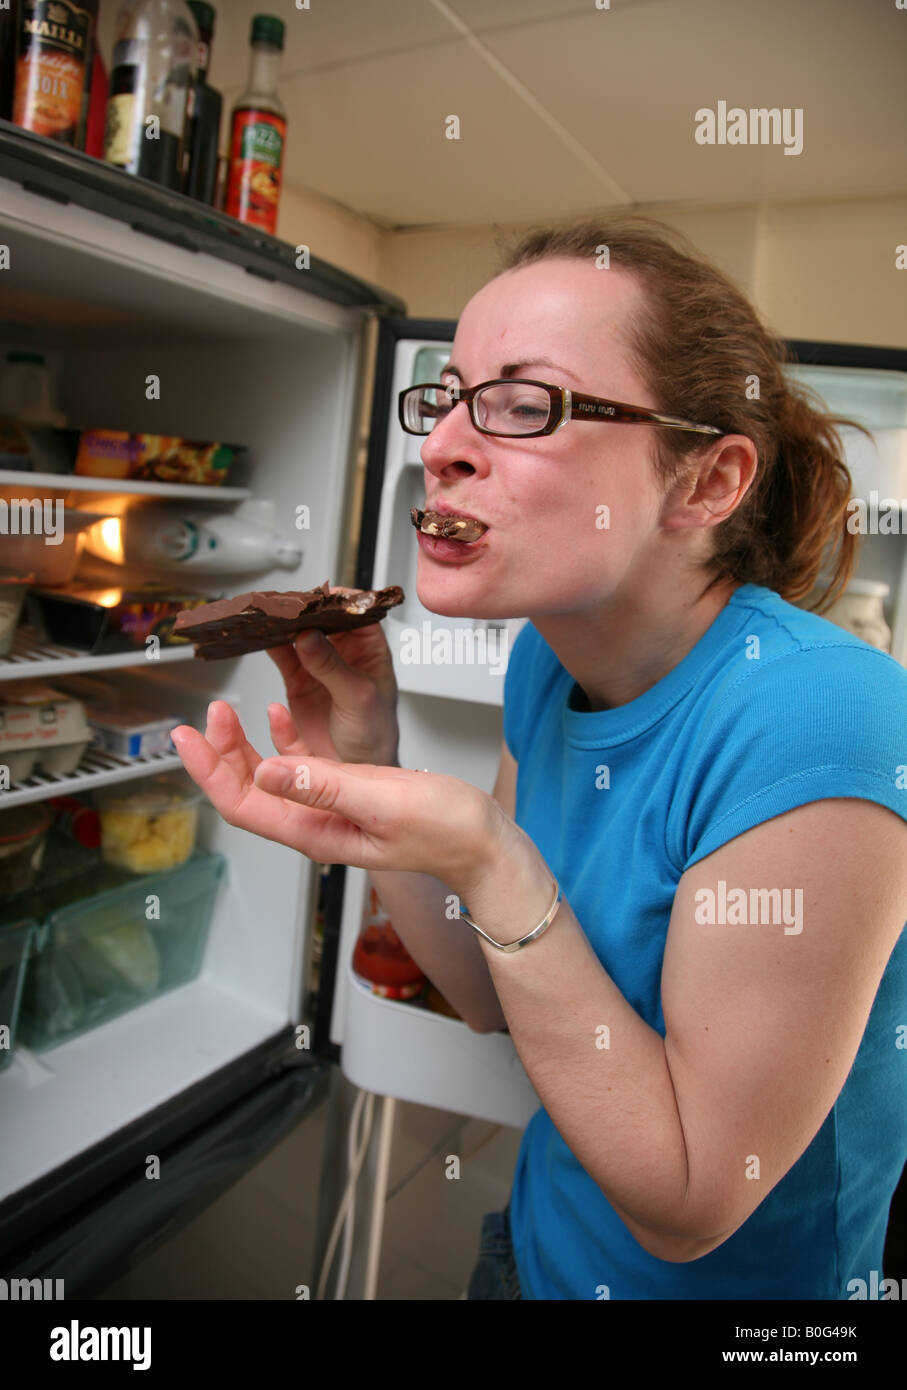 Bulimic teenager stuffing her face with a large bar of chocolate from the fridge Stock Photo